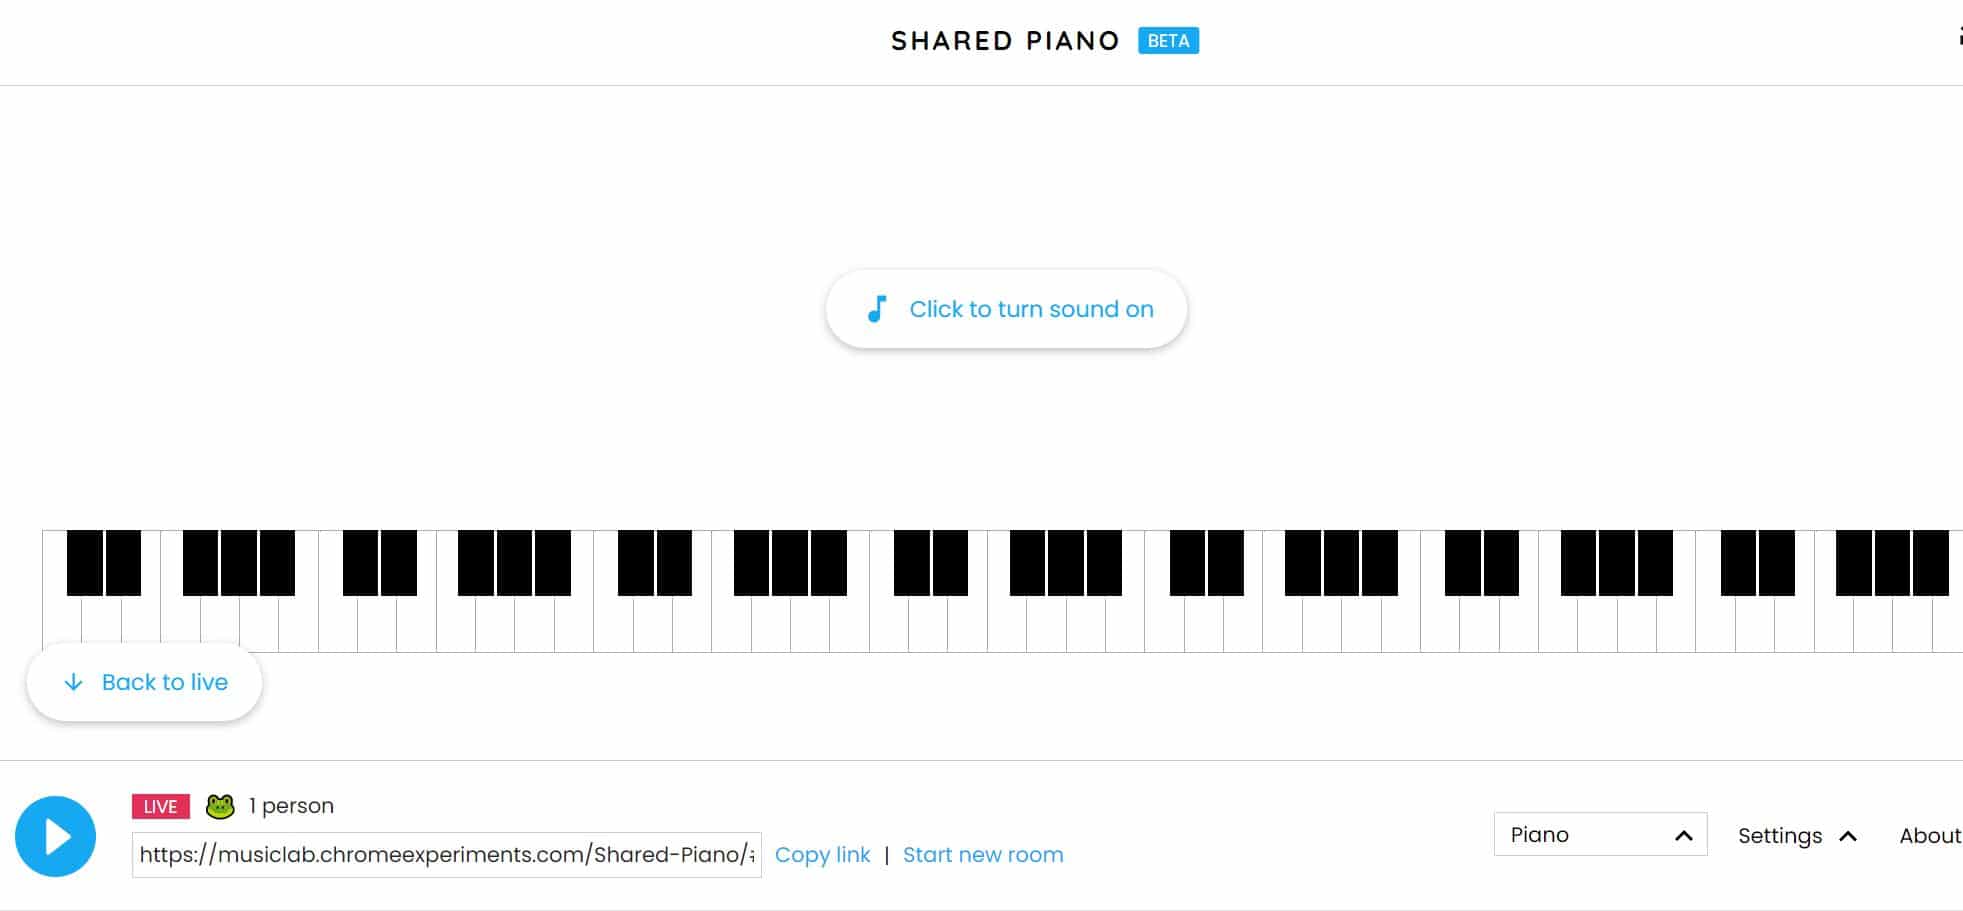 13 Of The Best Piano Tuning Apps To Get Your Tunes Right